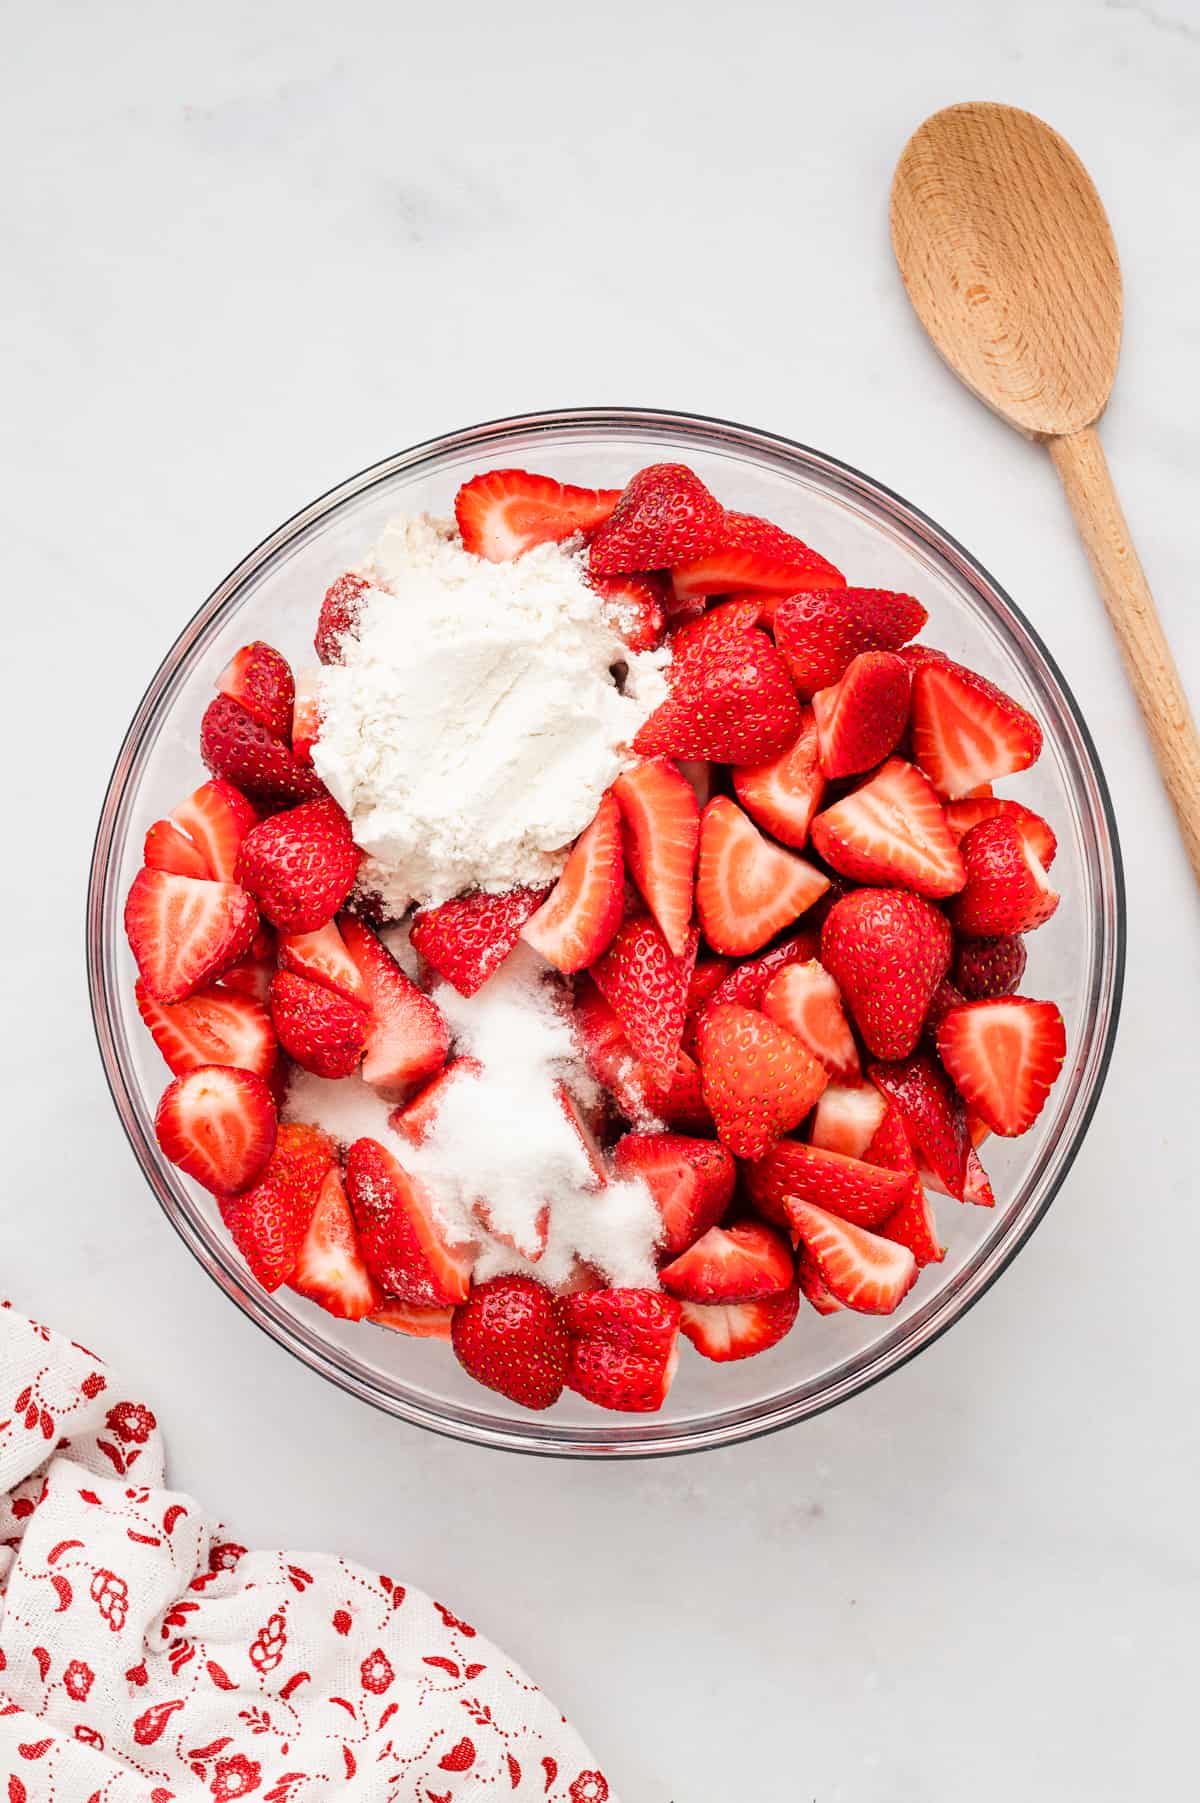 Combining fresh prepared strawberries and other filling ingredients in mixing bowl for Strawberry Crisp